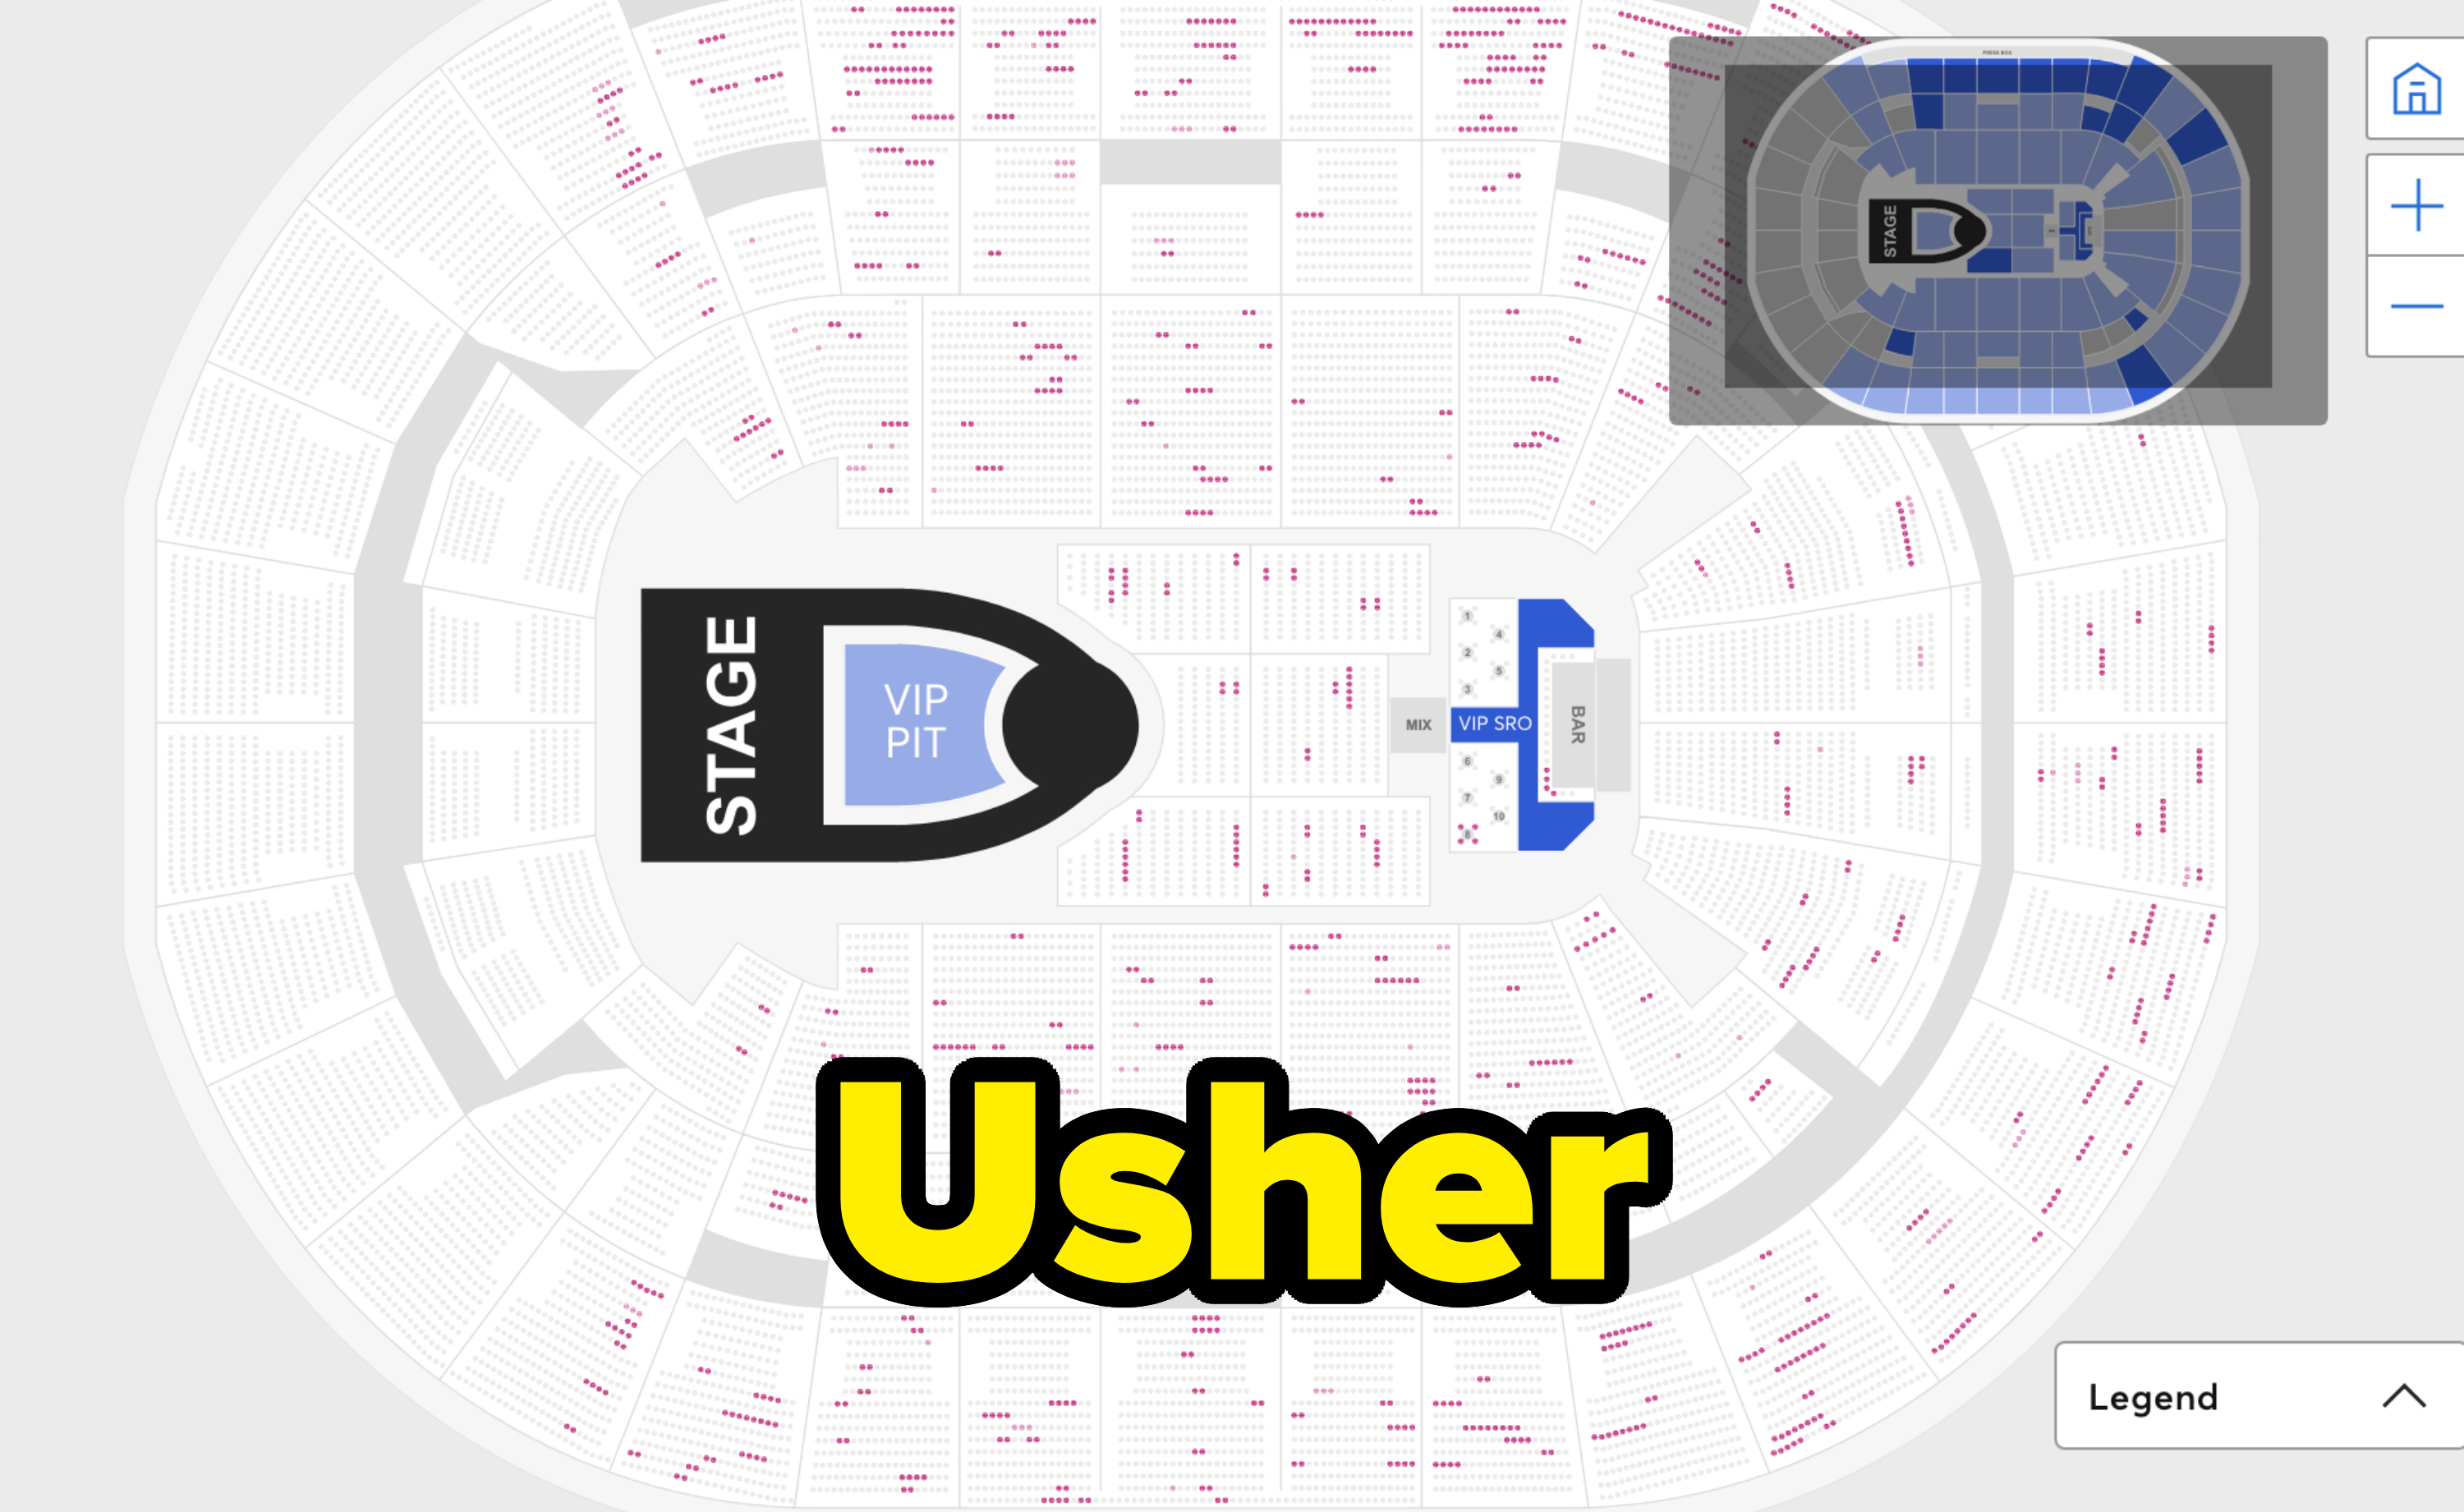 Seating chart of a venue showing stage placement, seats labeled by section, VIP area, and entrances